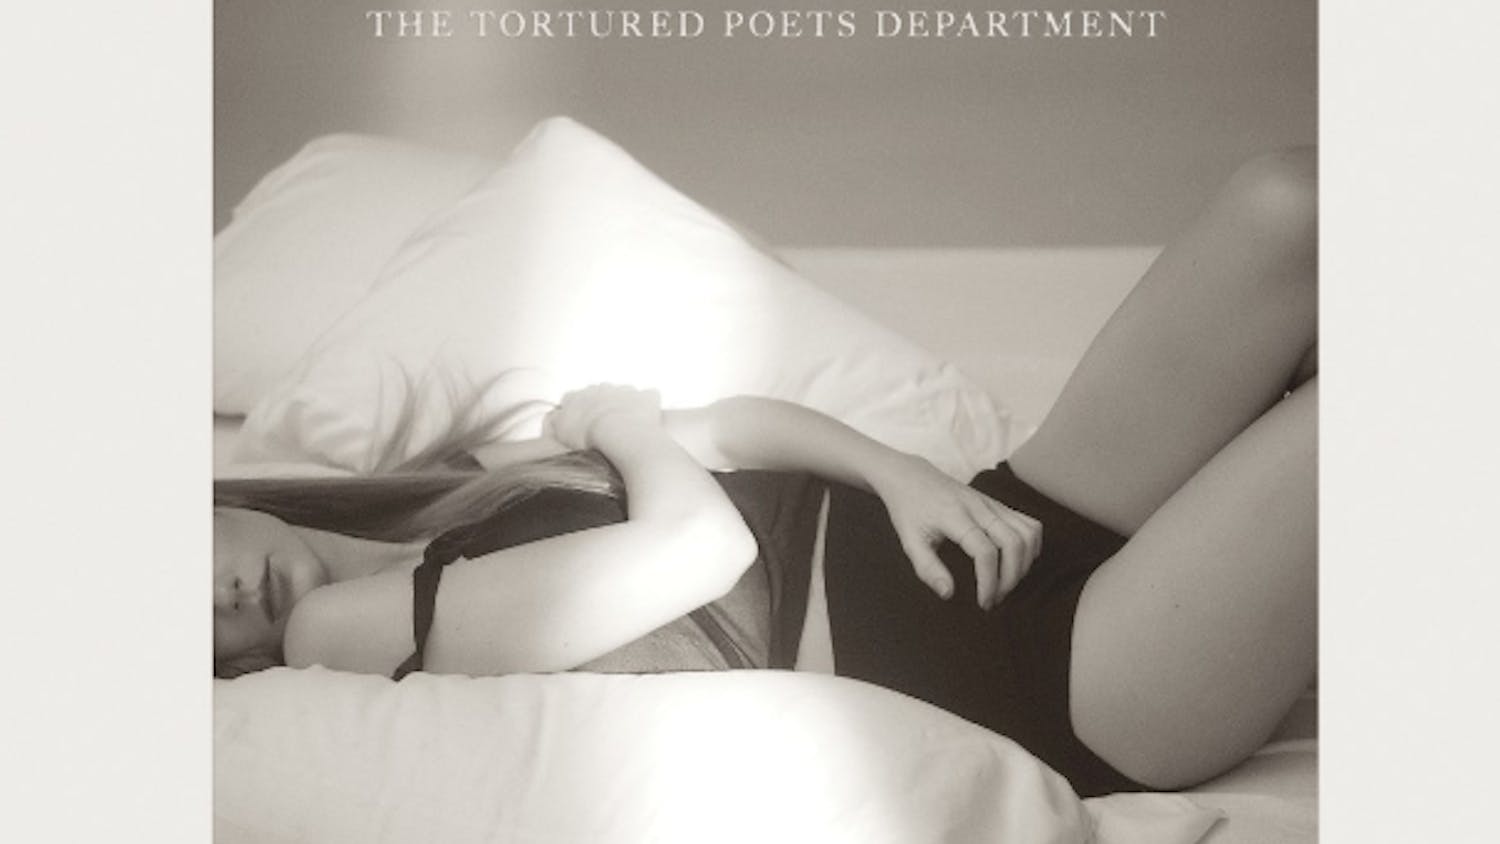 “The Tortured Poets Department” is home to tracks that showcase heartbroken poetry straight from Taylor Swift’s lyrical typewriter (Photo courtesy of Apple Music).